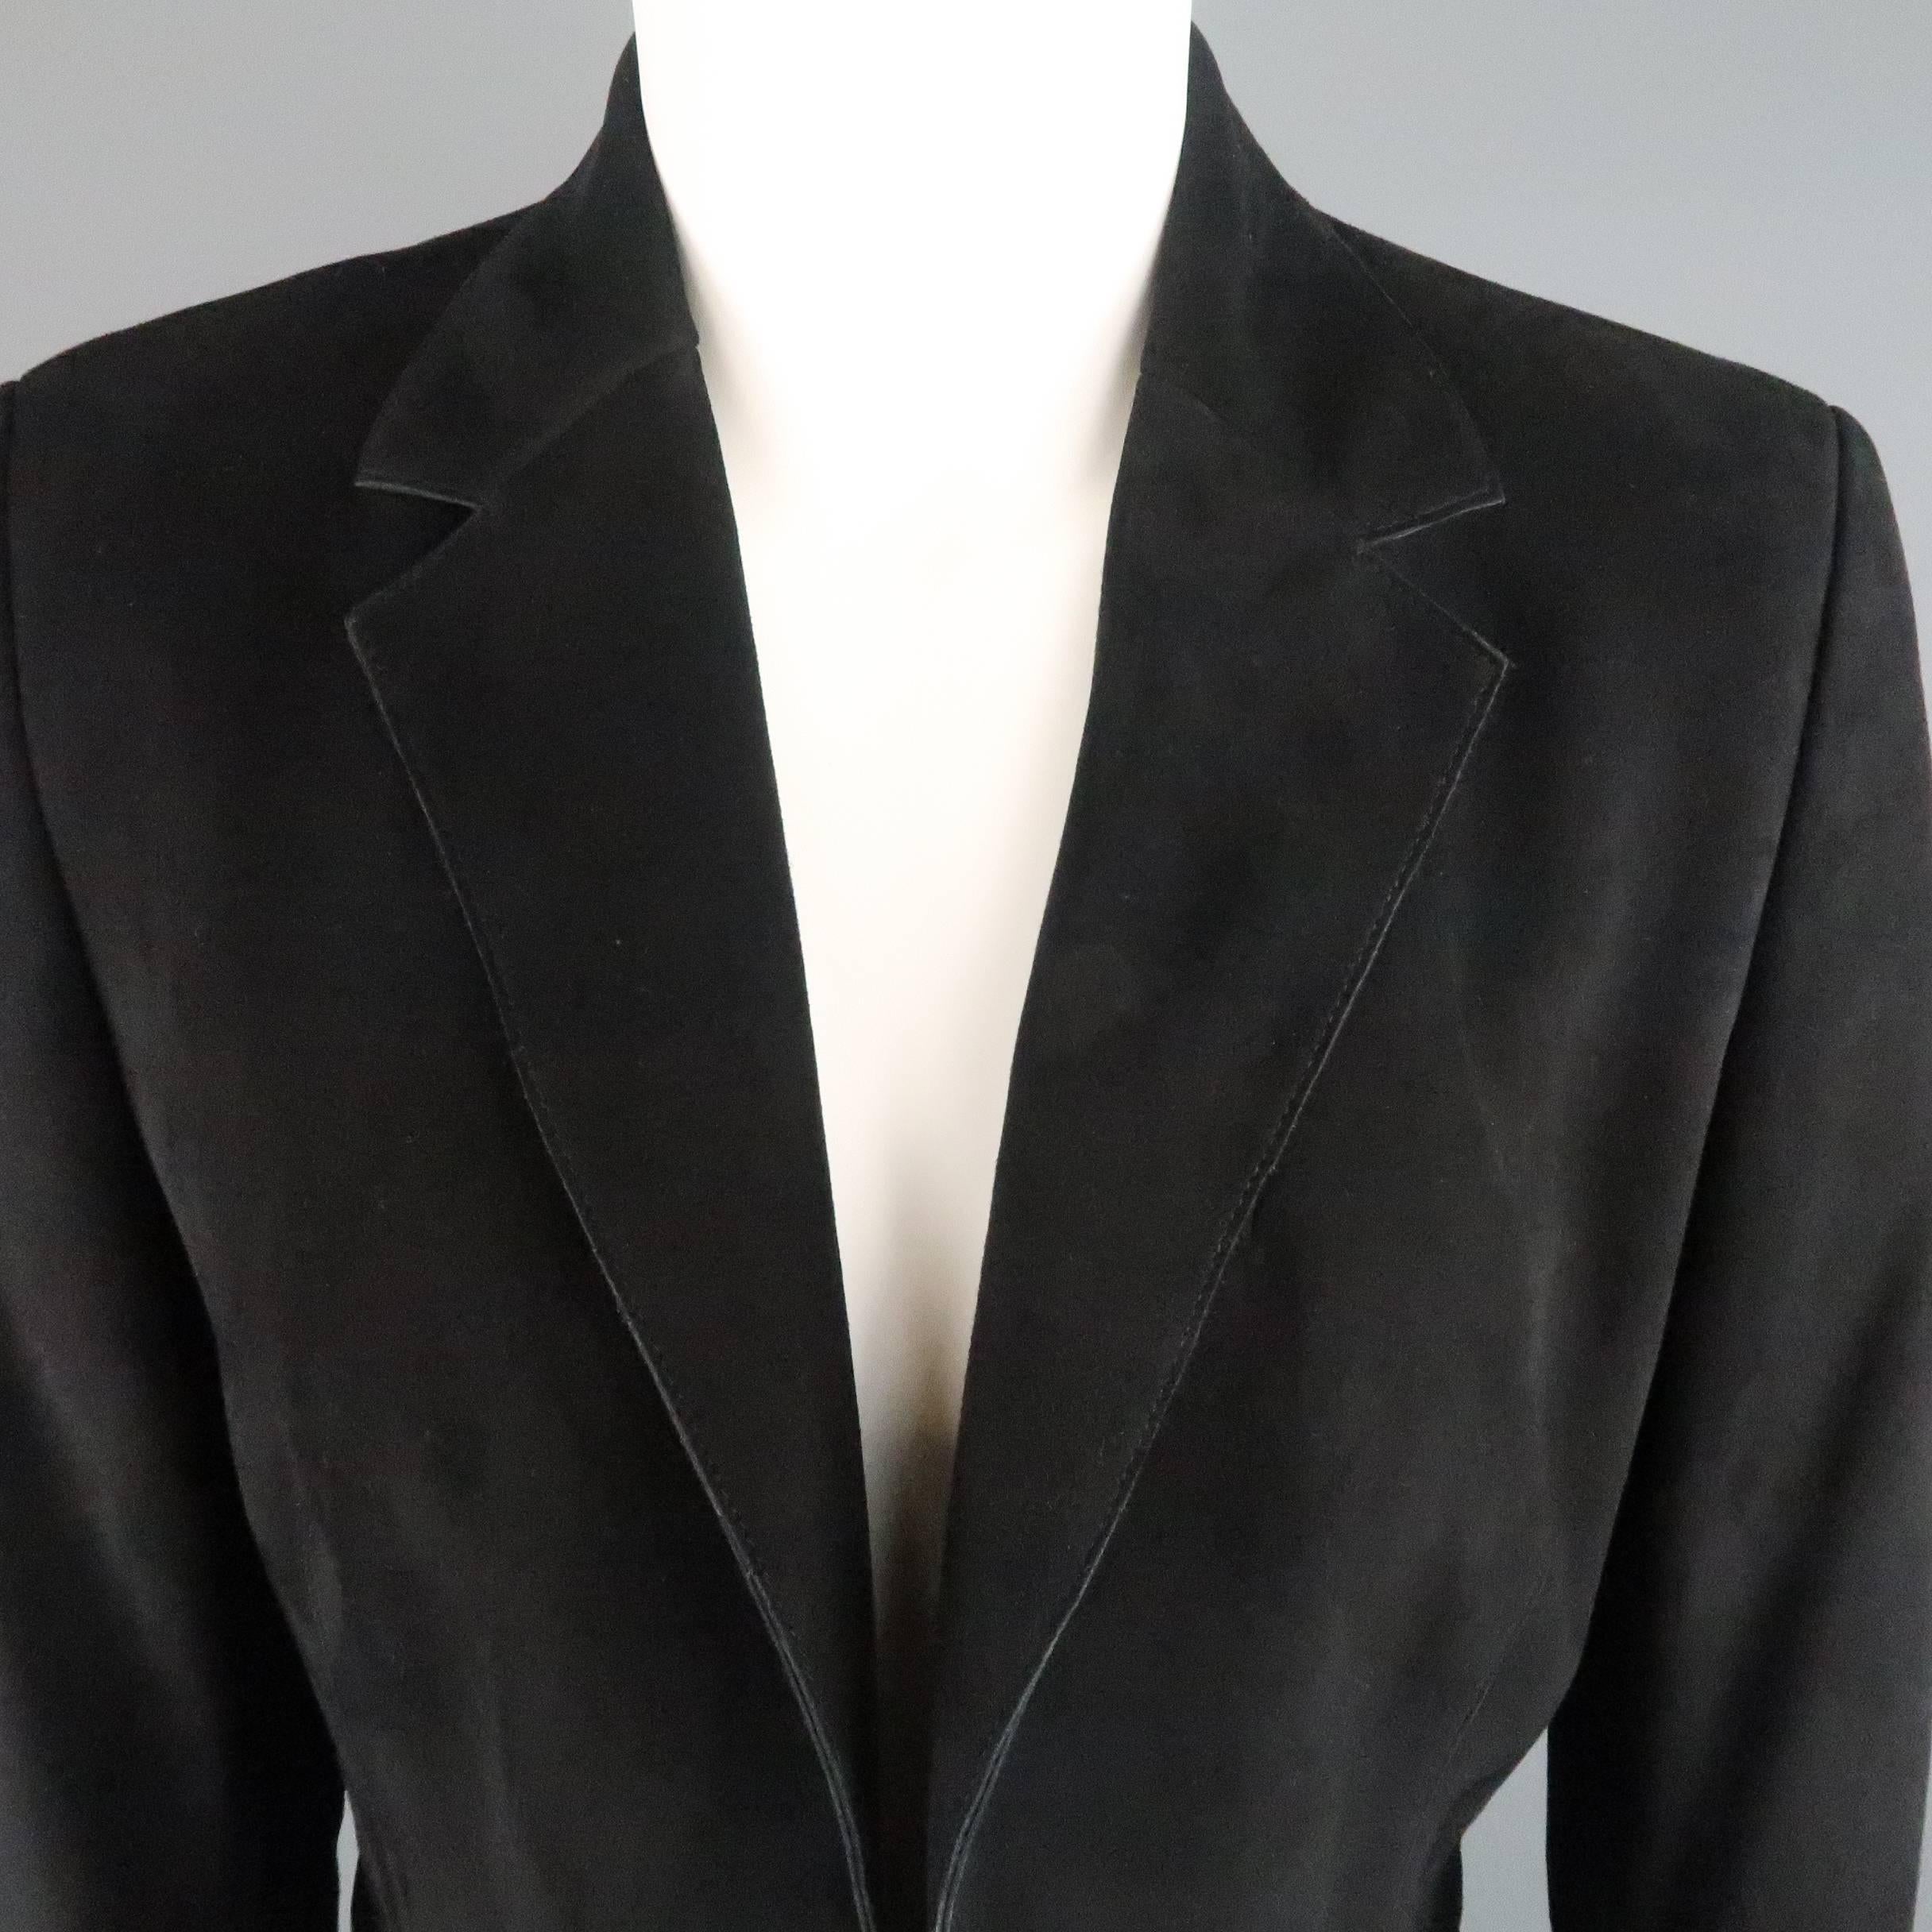 AKRIS blazer comes in black suede and features a classic notch lapel, double hook eye closure, and detachable zip off wool panel with faux flap pockets.
 
Pre-Owned Condition.
Marked: US 10
 
Measurements:
 
Shoulder: 15 in.
Bust: 37 in.
Sleeve: 26